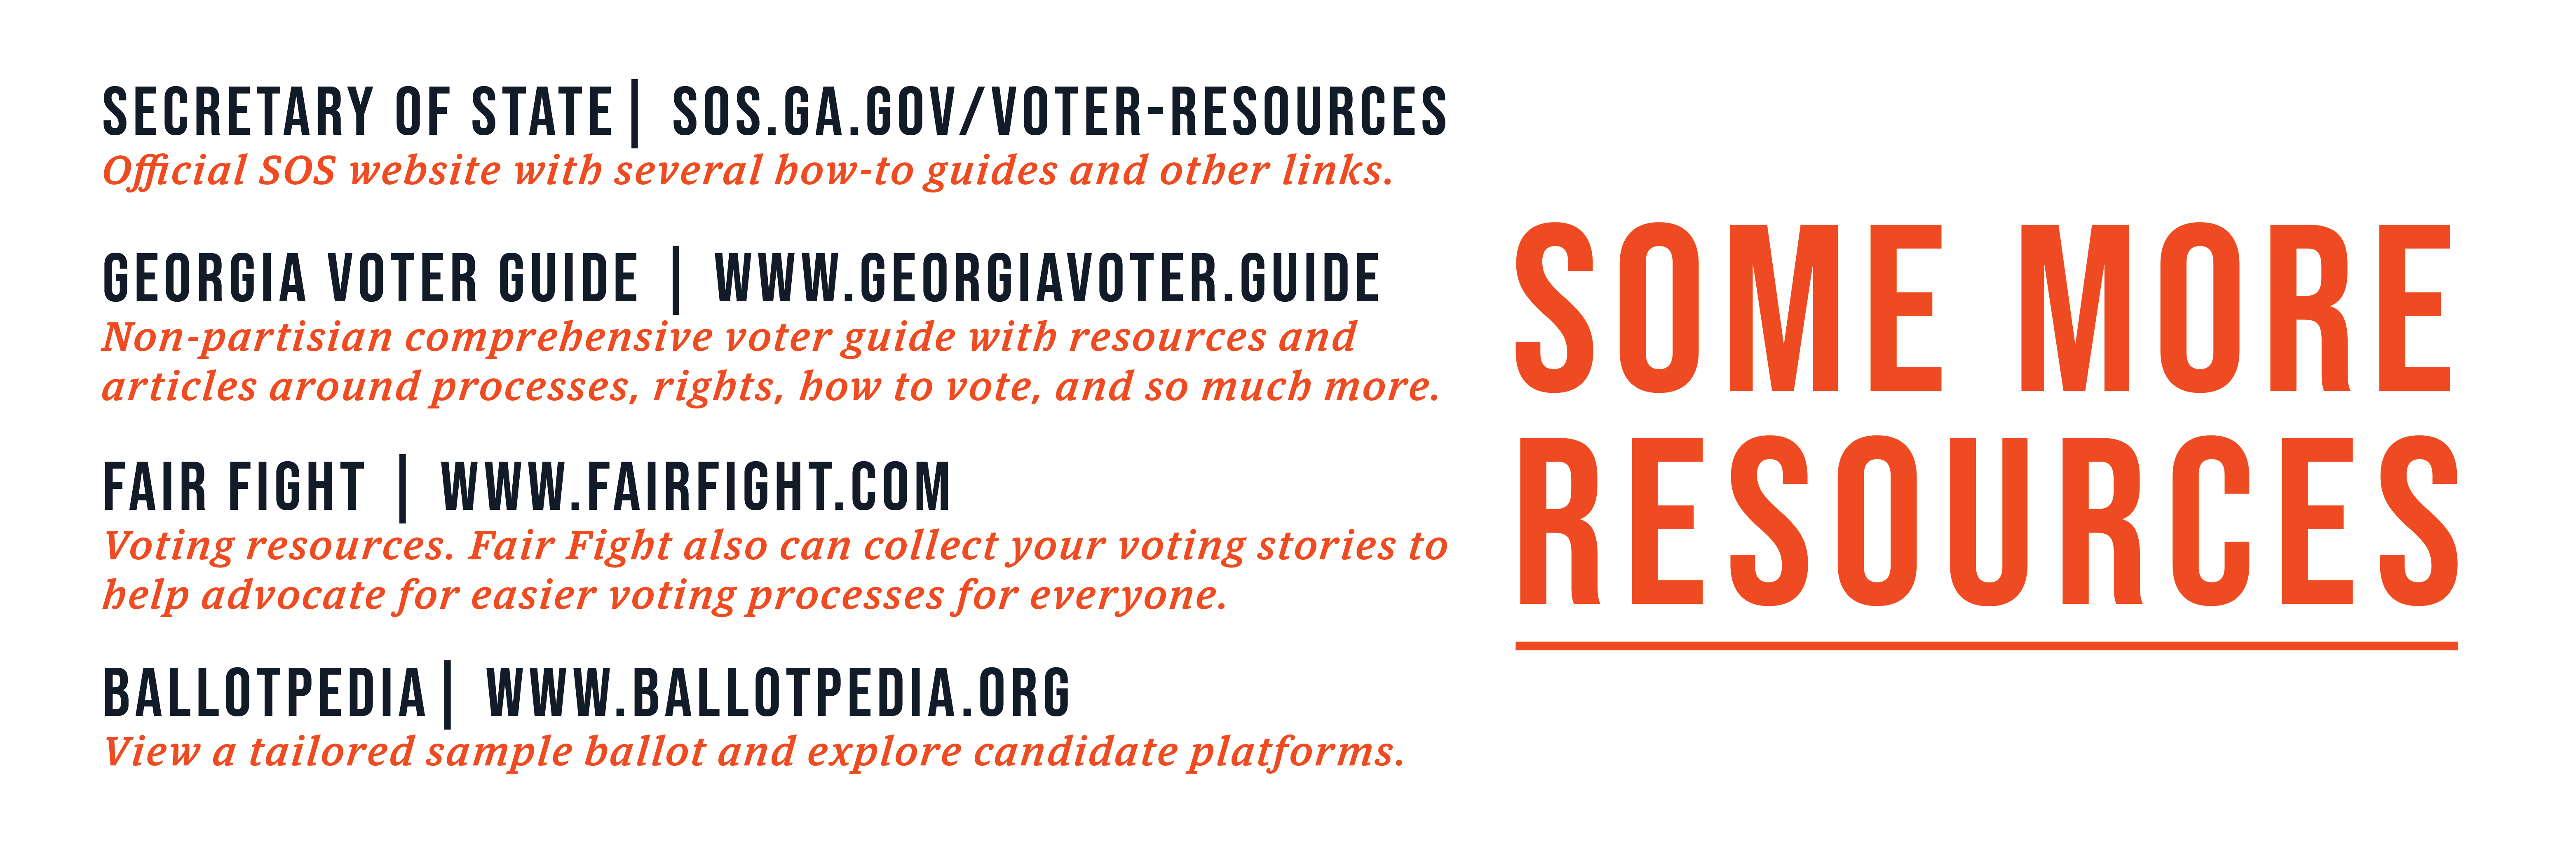 BlogGraphics August Midterms Resources